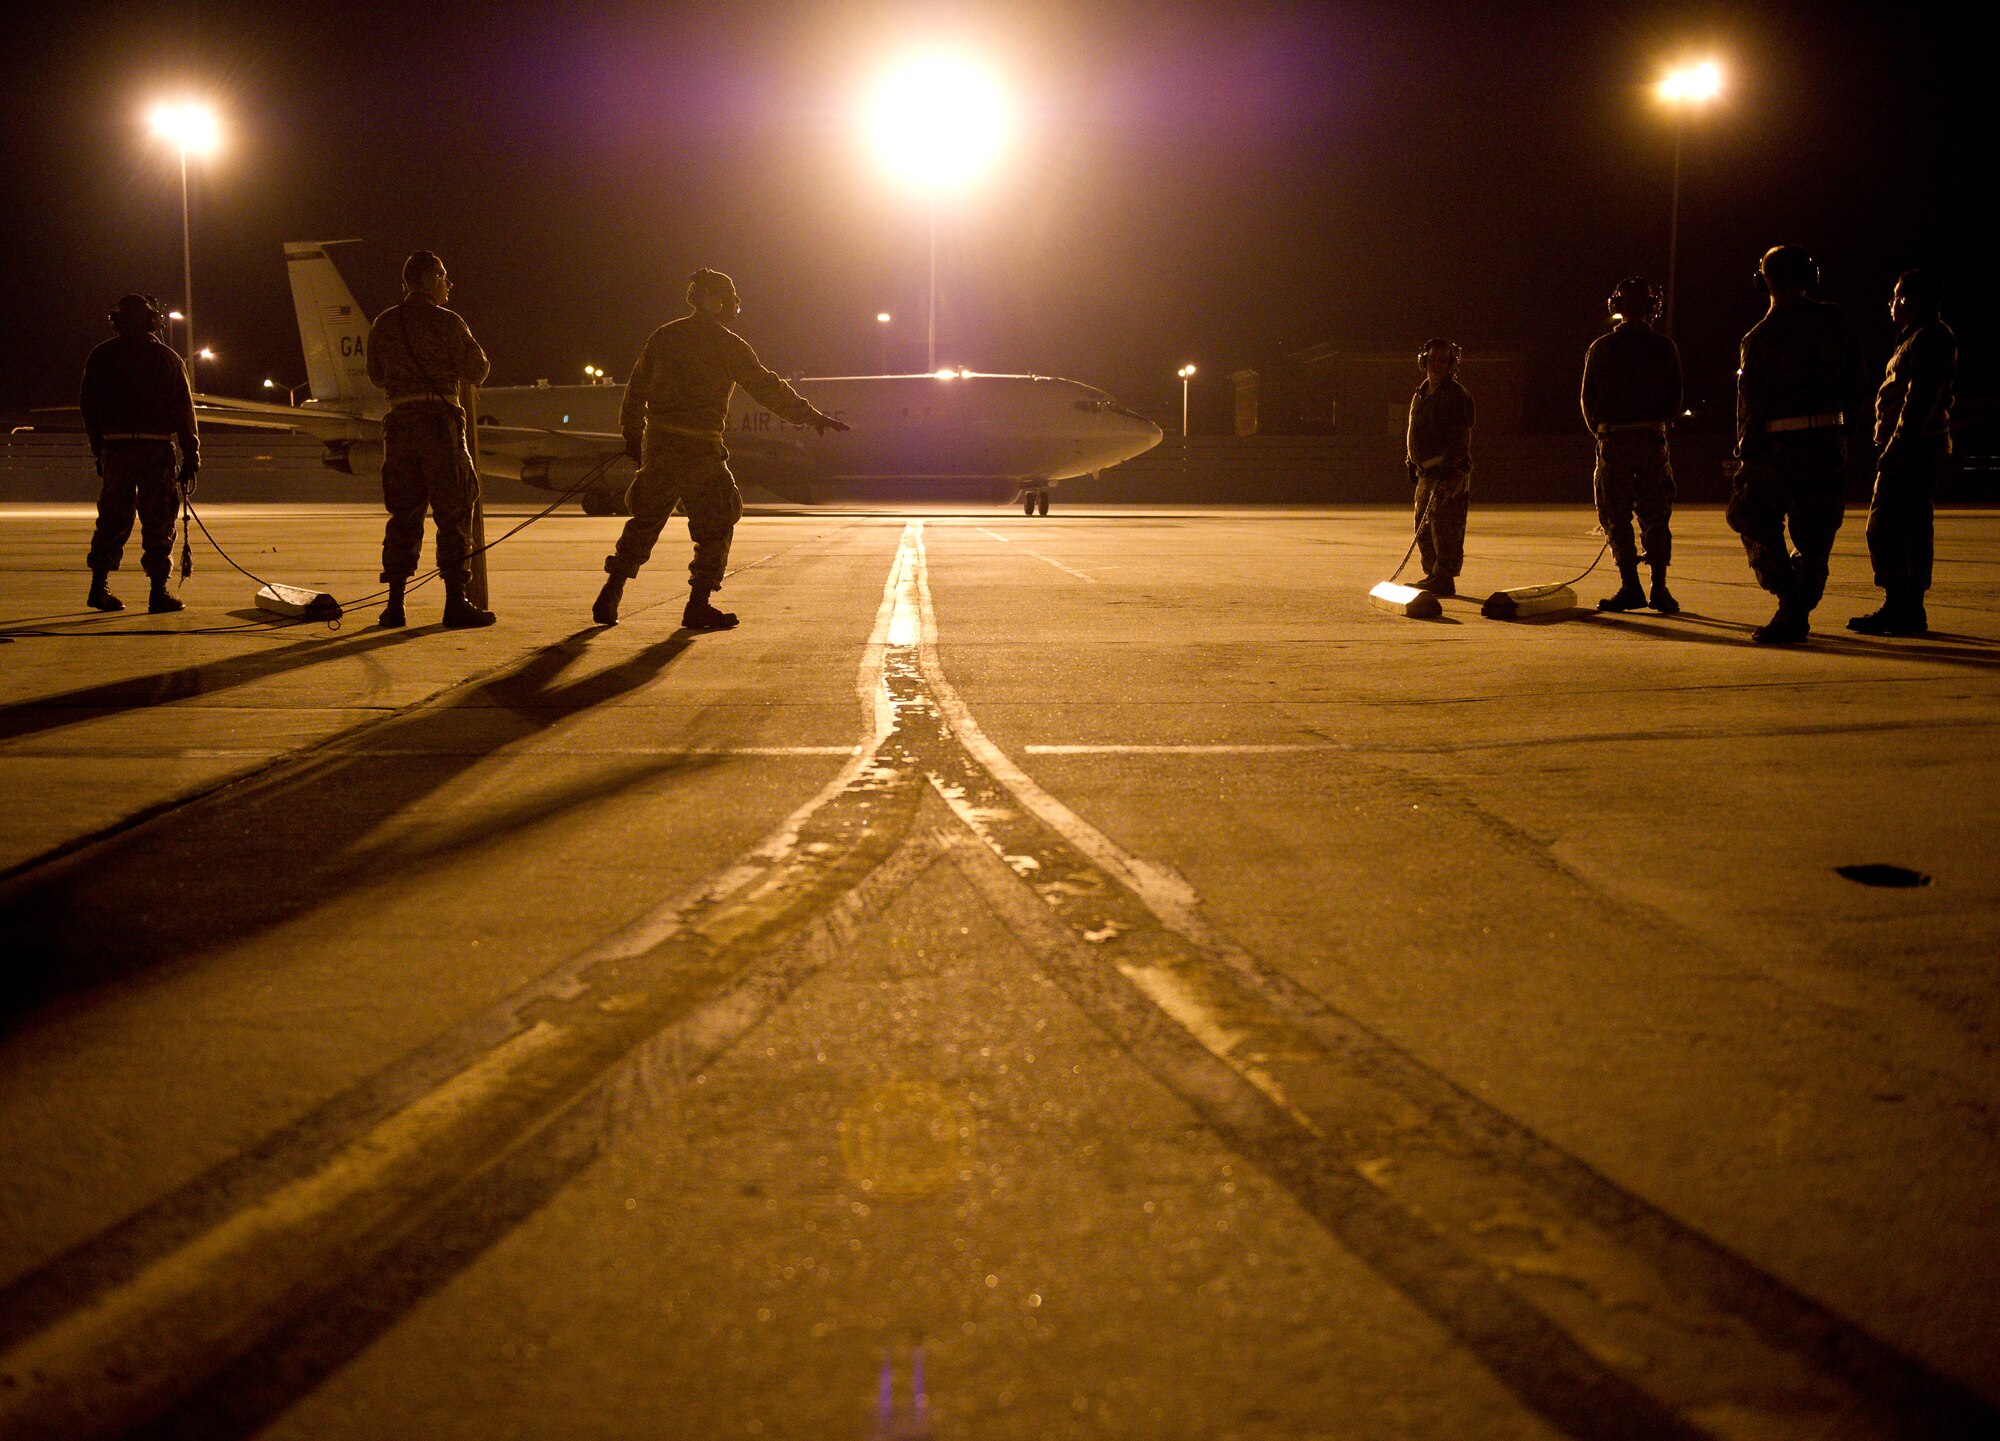 Crew chiefs from the 116th and 461st Air Control Wings catch an E-8 Joint STARS returning from a night mission at Robins Air Force Base, Ga., Feb. 15, 2012. The crew chiefs wait as the aircraft is marshaled to its parking spot so they can perform post-flight checks and ensure the aircraft is ready for its next mission.  (National Guard photo by Master Sgt. Roger Parsons/Released)